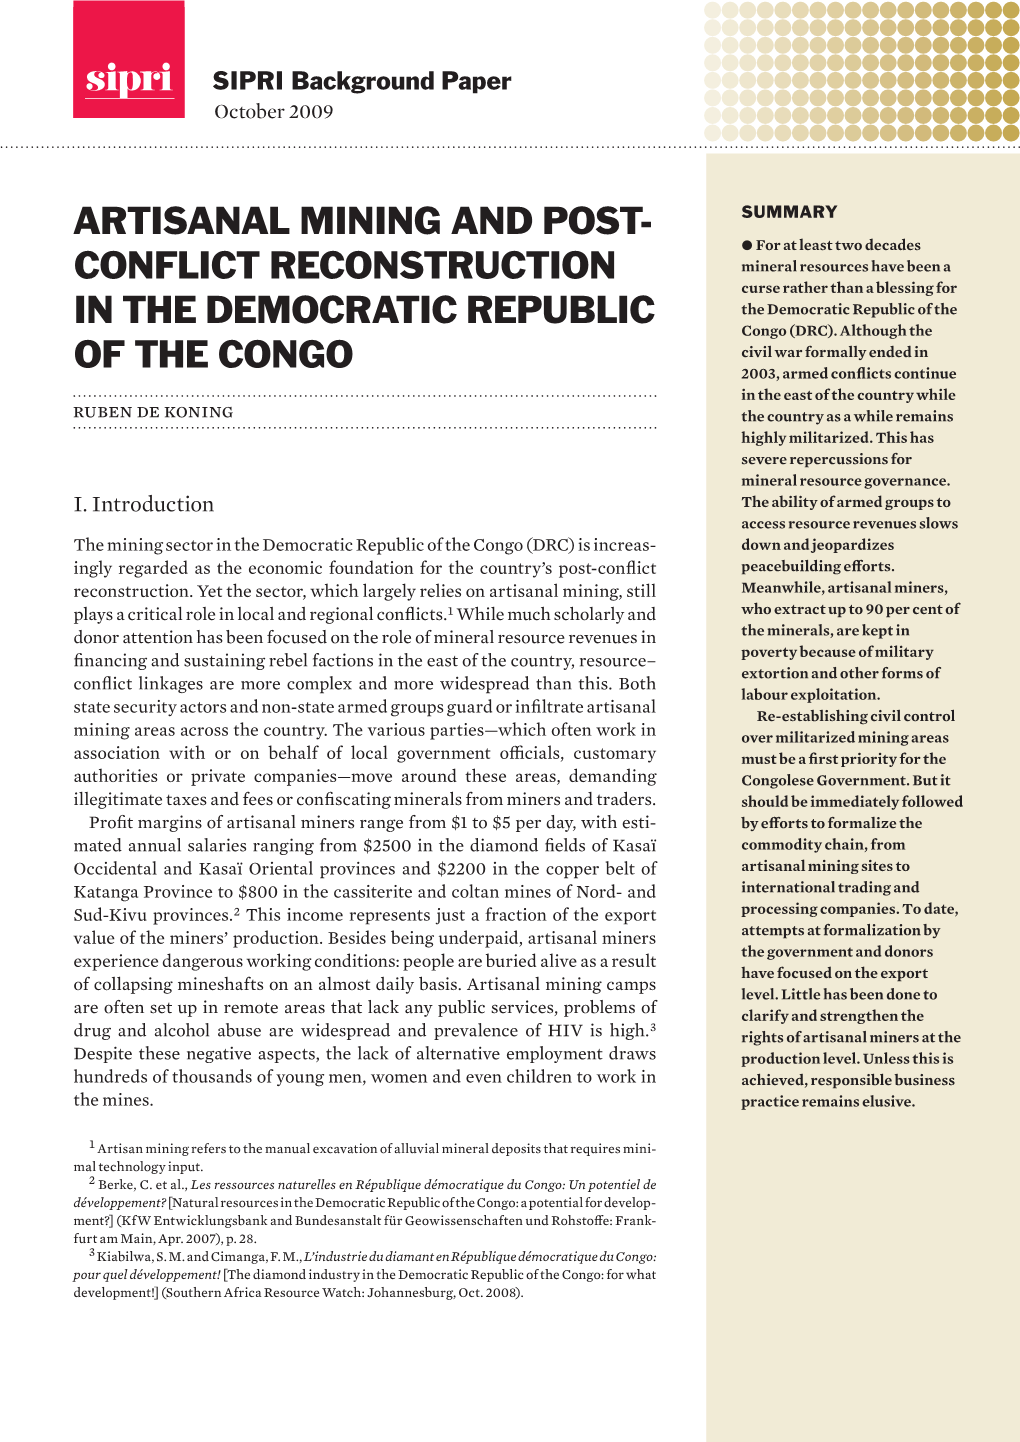 Artisanal Mining and Post-Conflict Reconstruction in The